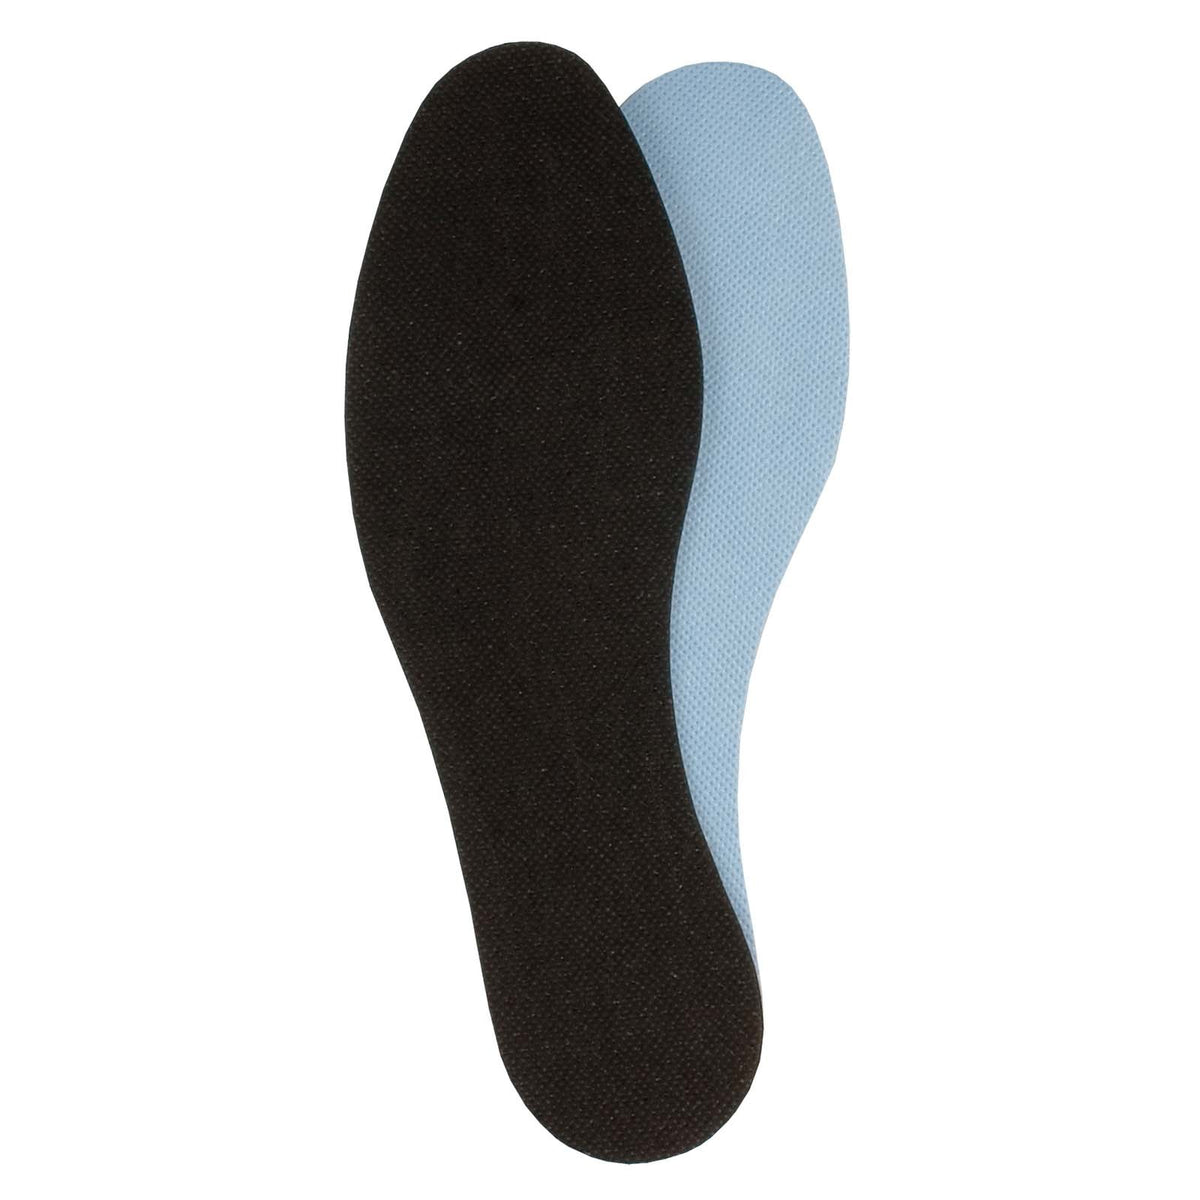 Fresh Liners - thin insoles